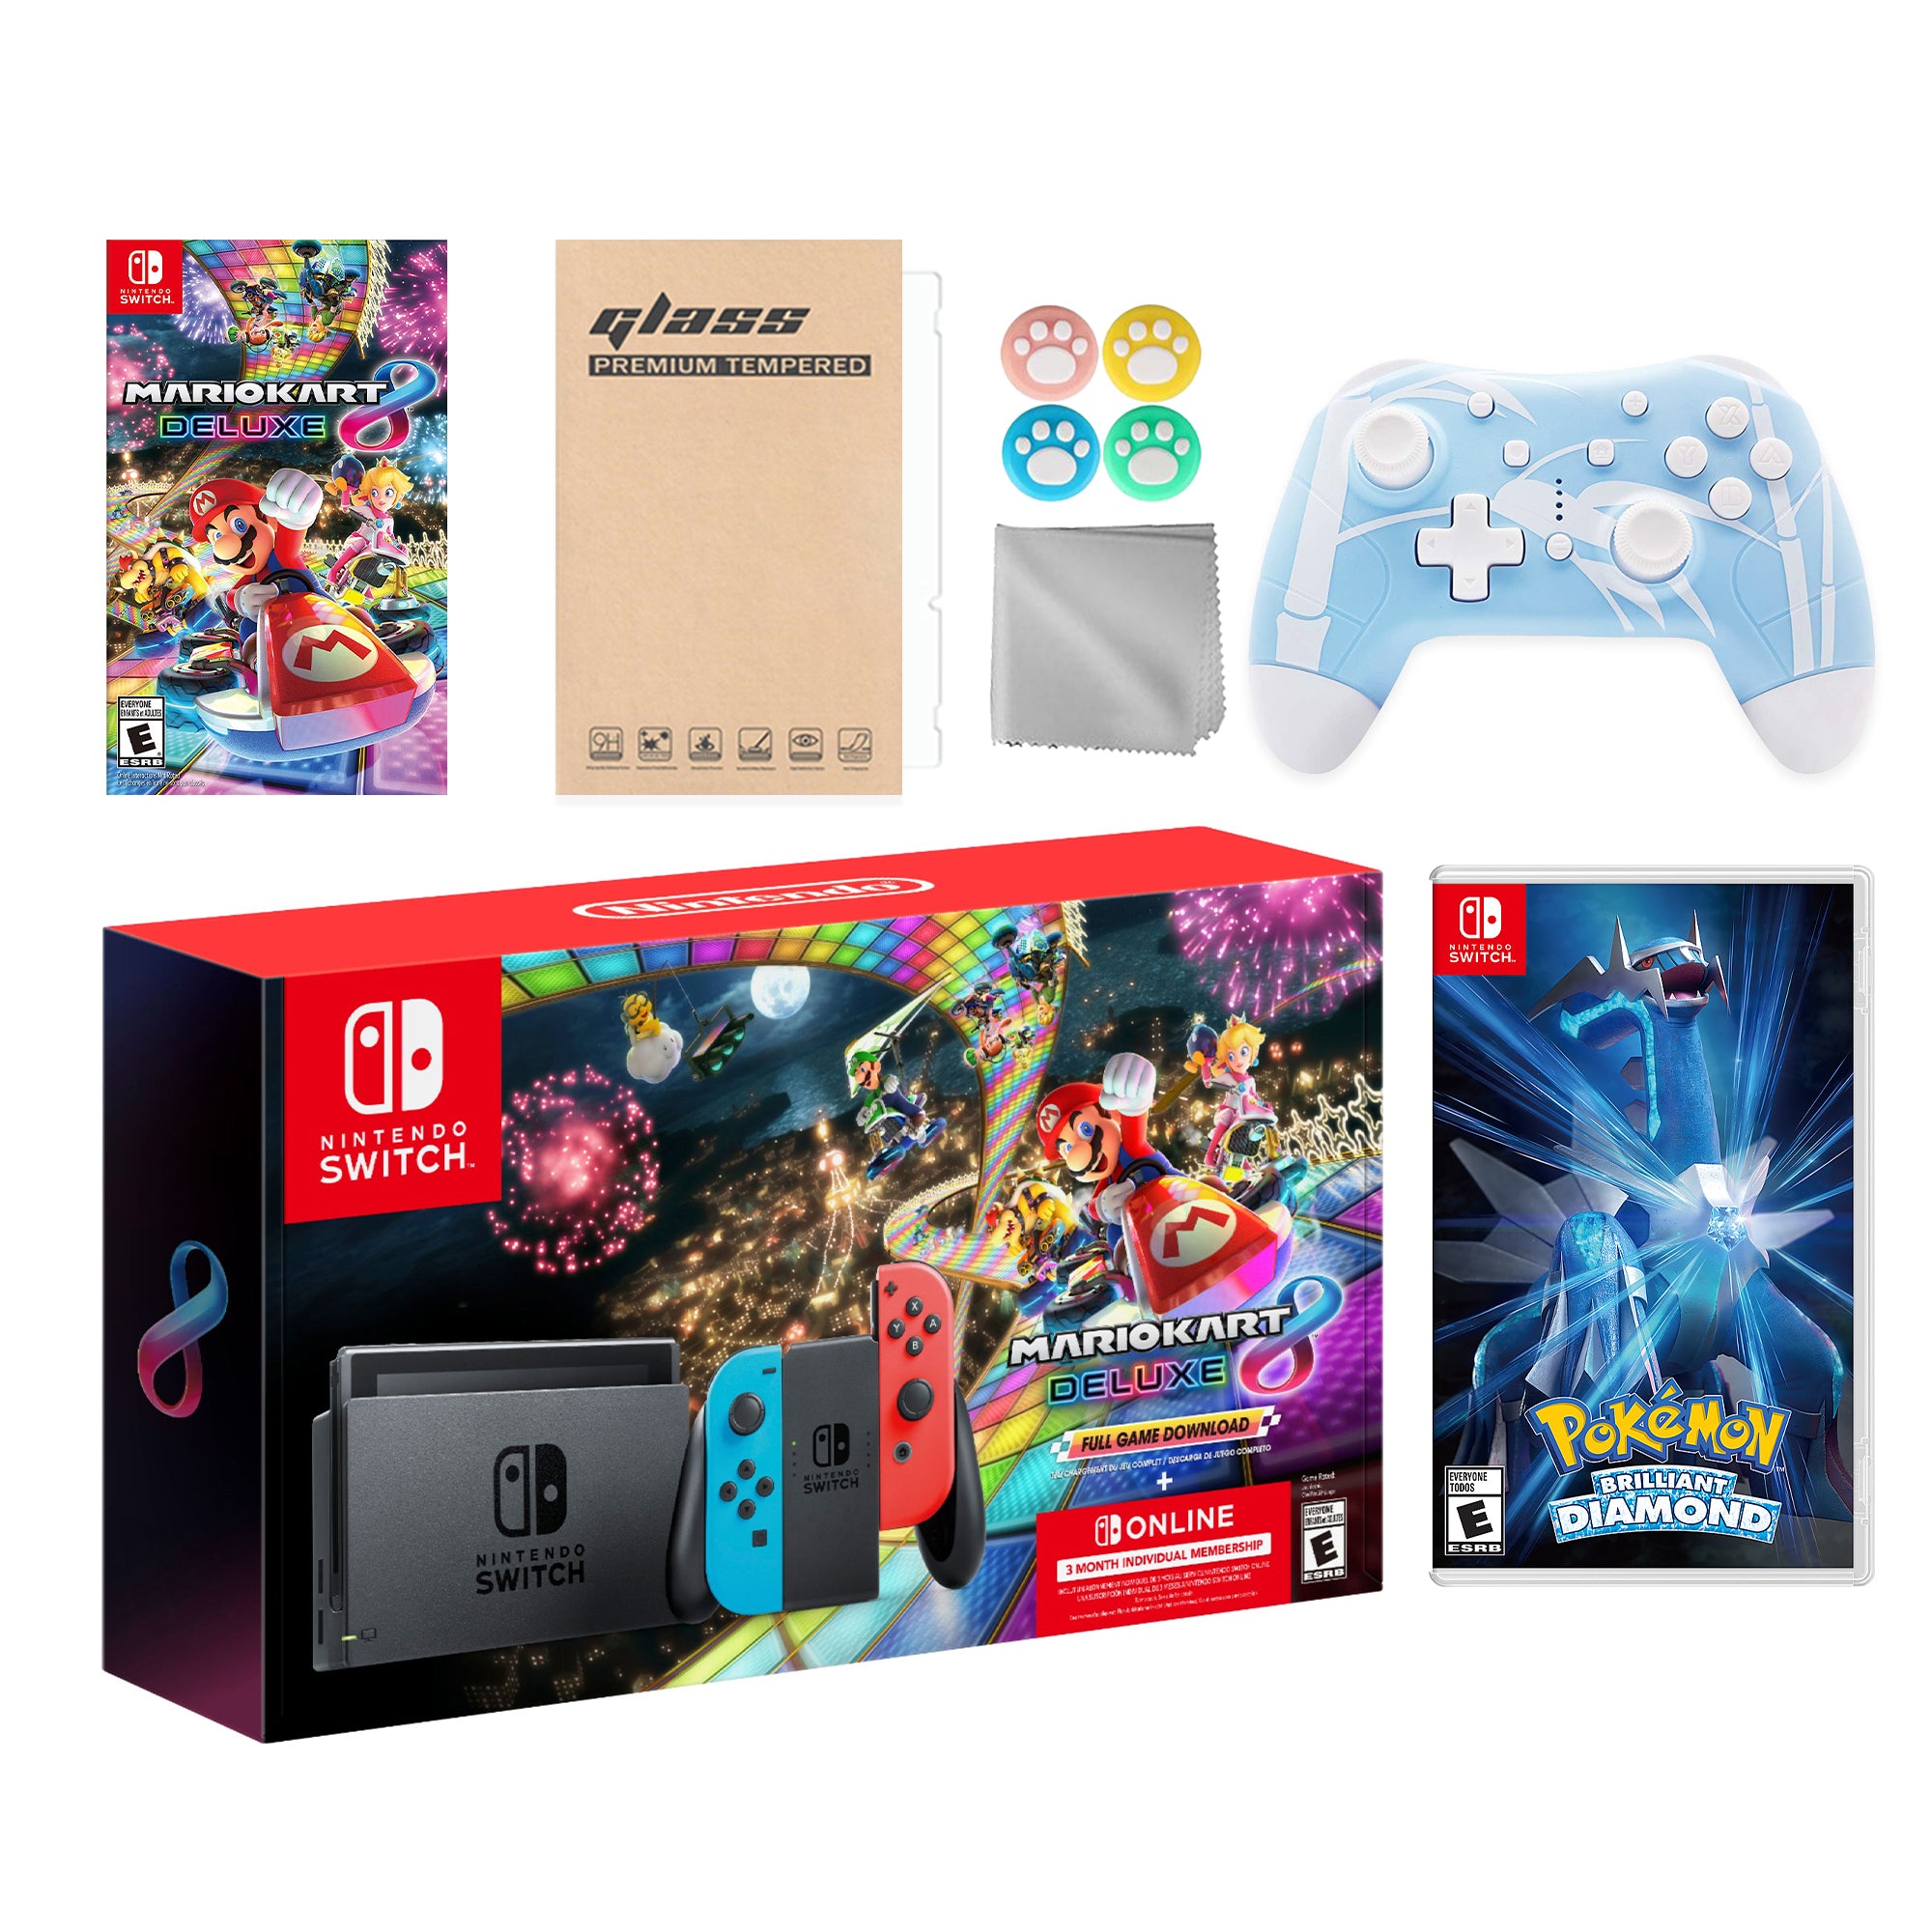 Nintendo Switch Mario Kart 8 Deluxe Bundle: Red Blue Console, Mario Kart 8 & Membership, Pokemon Brilliant Diamond, Mytrix Wireless Pro Controller Blue Bamboo and Accessories